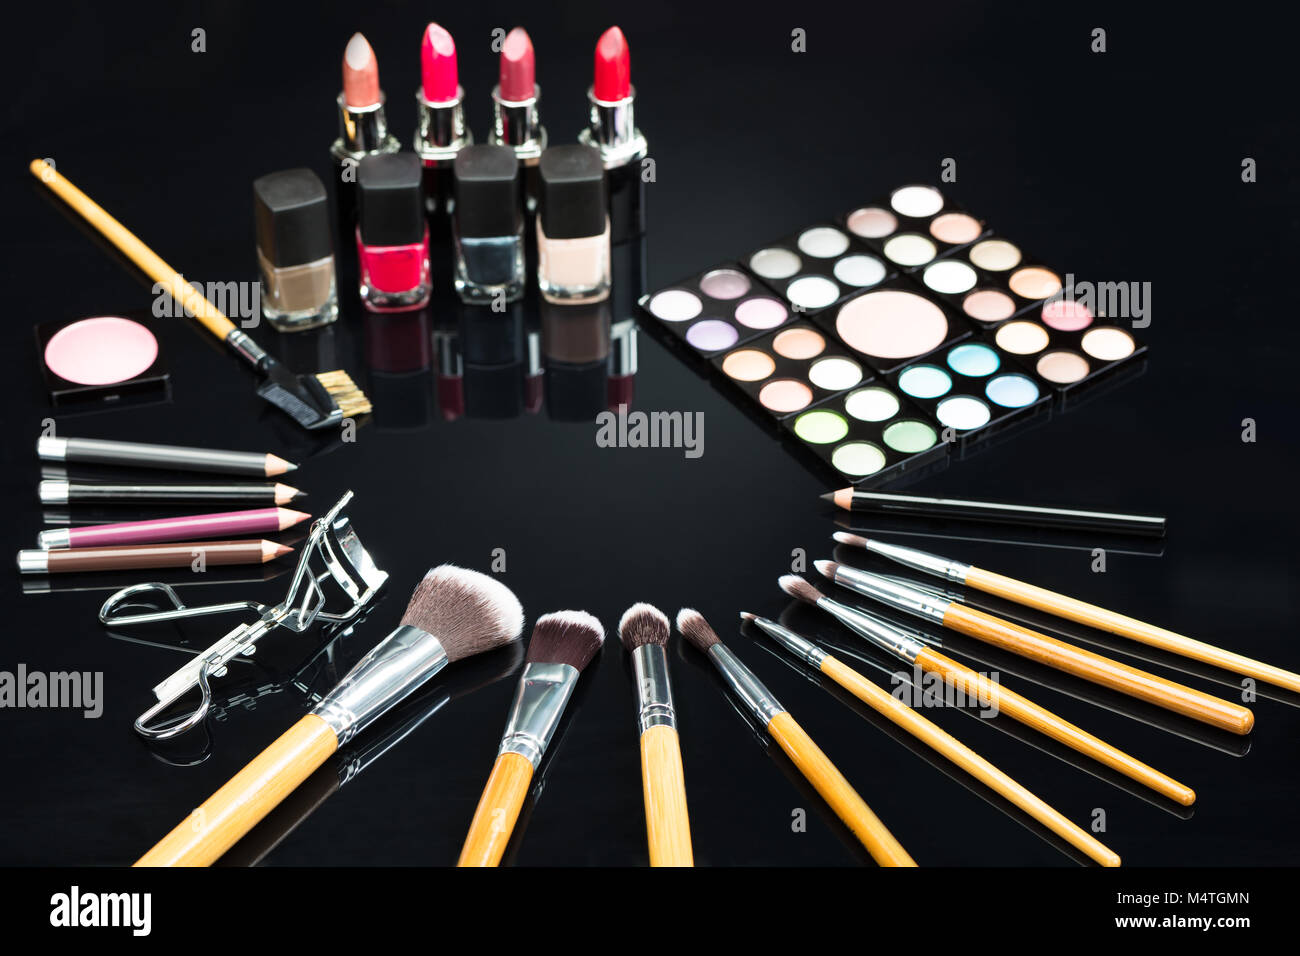 Professional Makeup Brushes And Make-up Products Set On Black Background  Stock Photo - Alamy